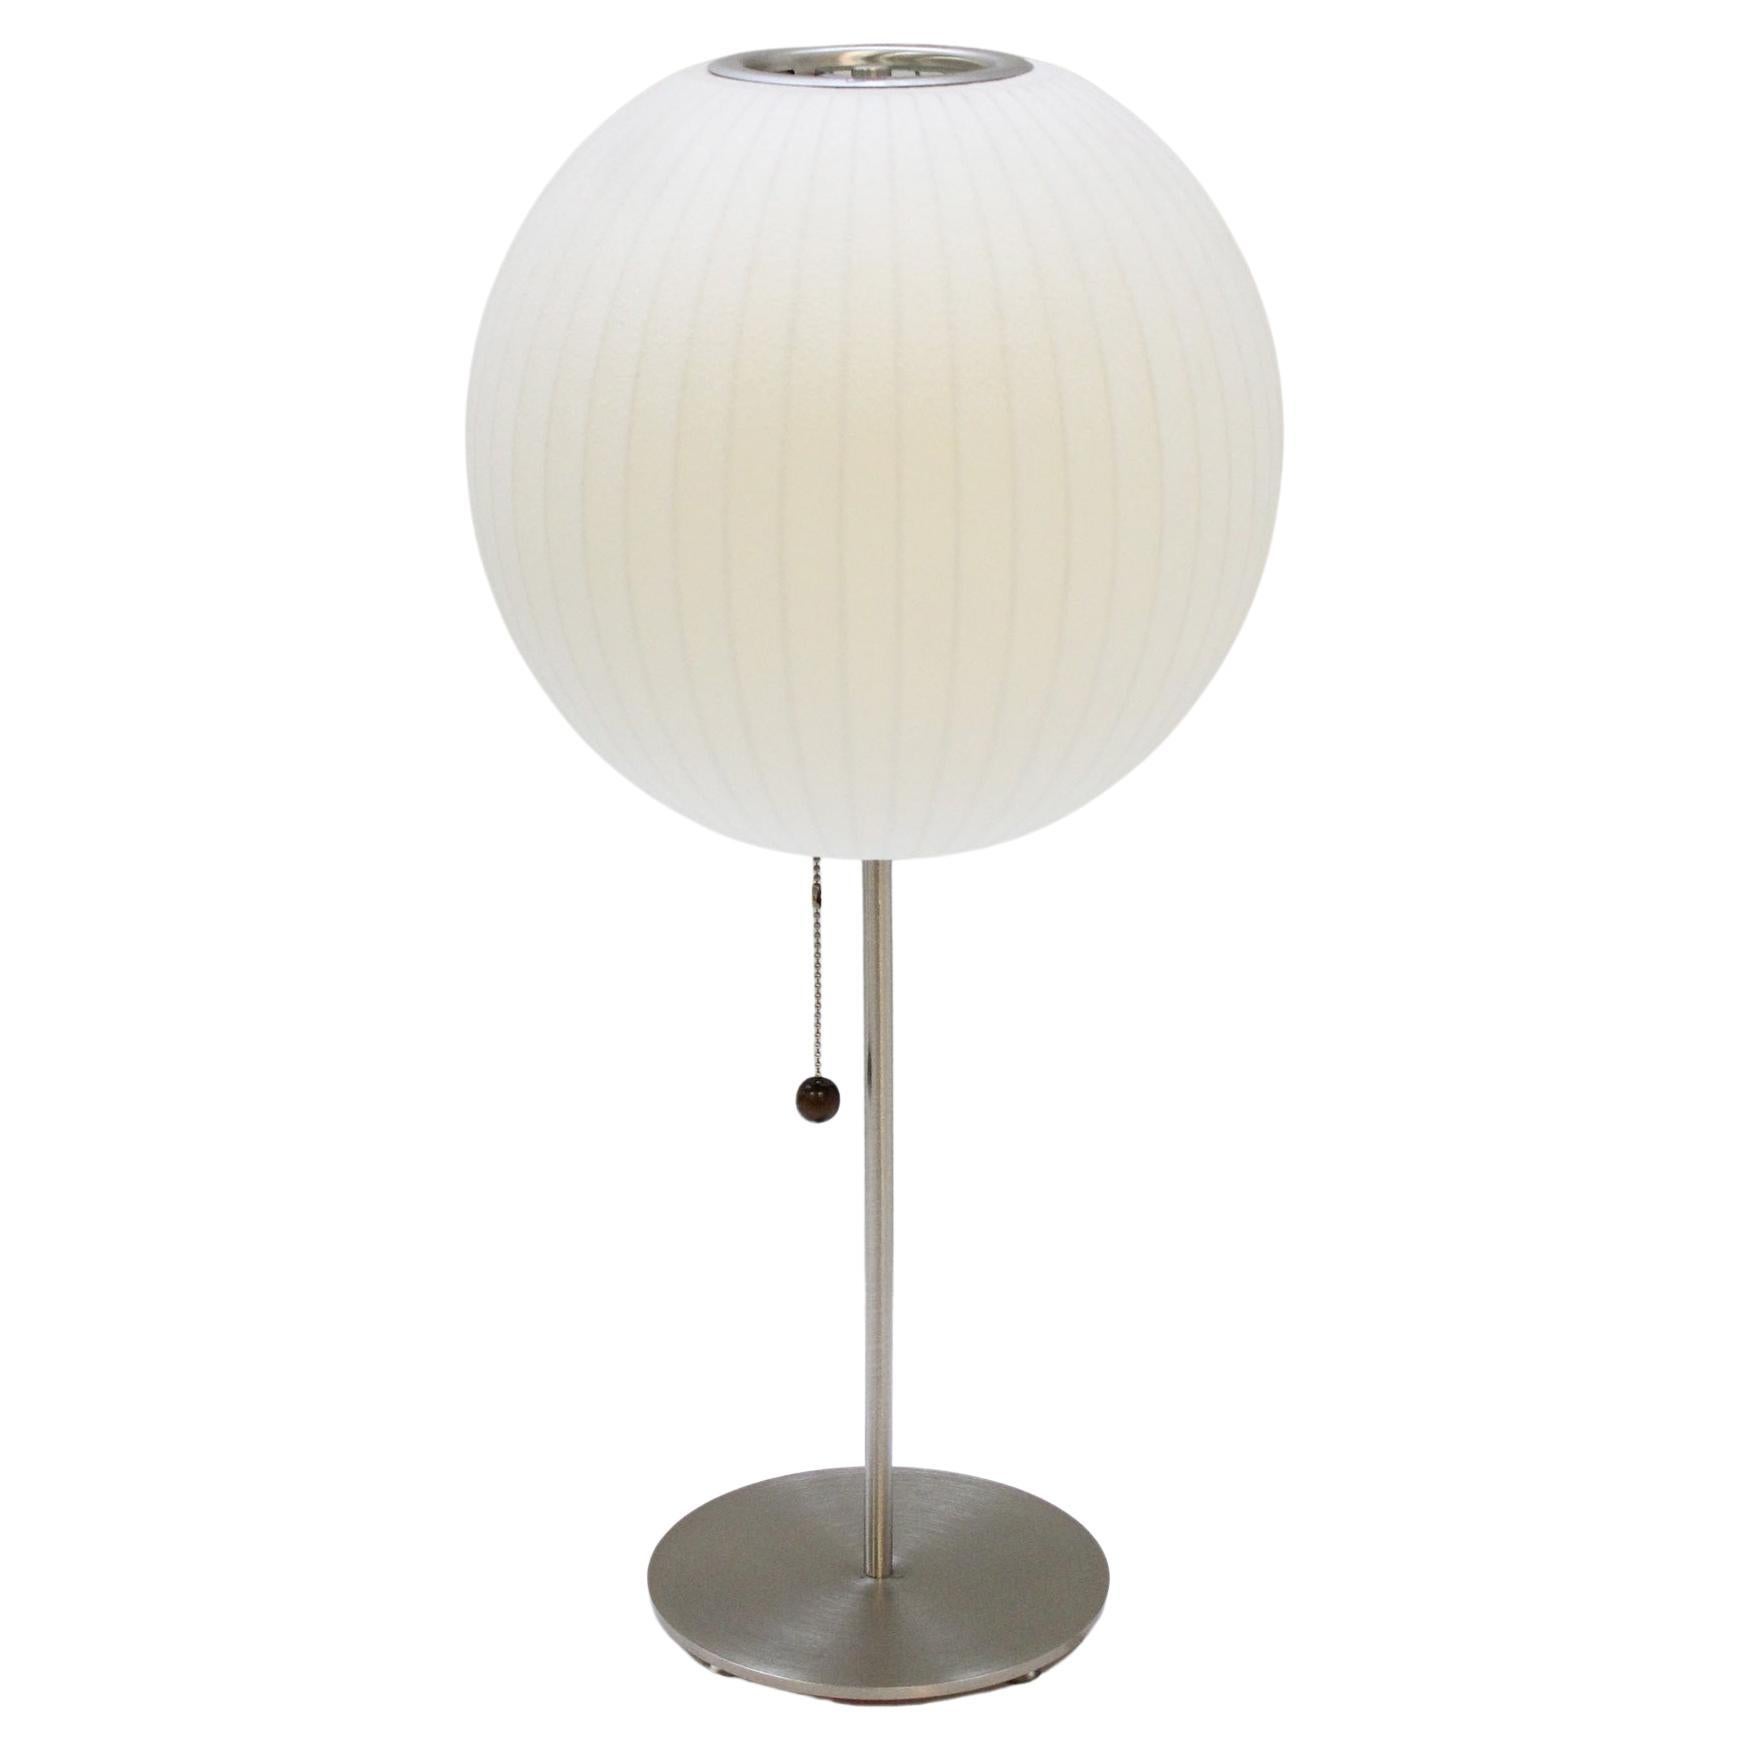 George Nelson Bubble Table Lamp